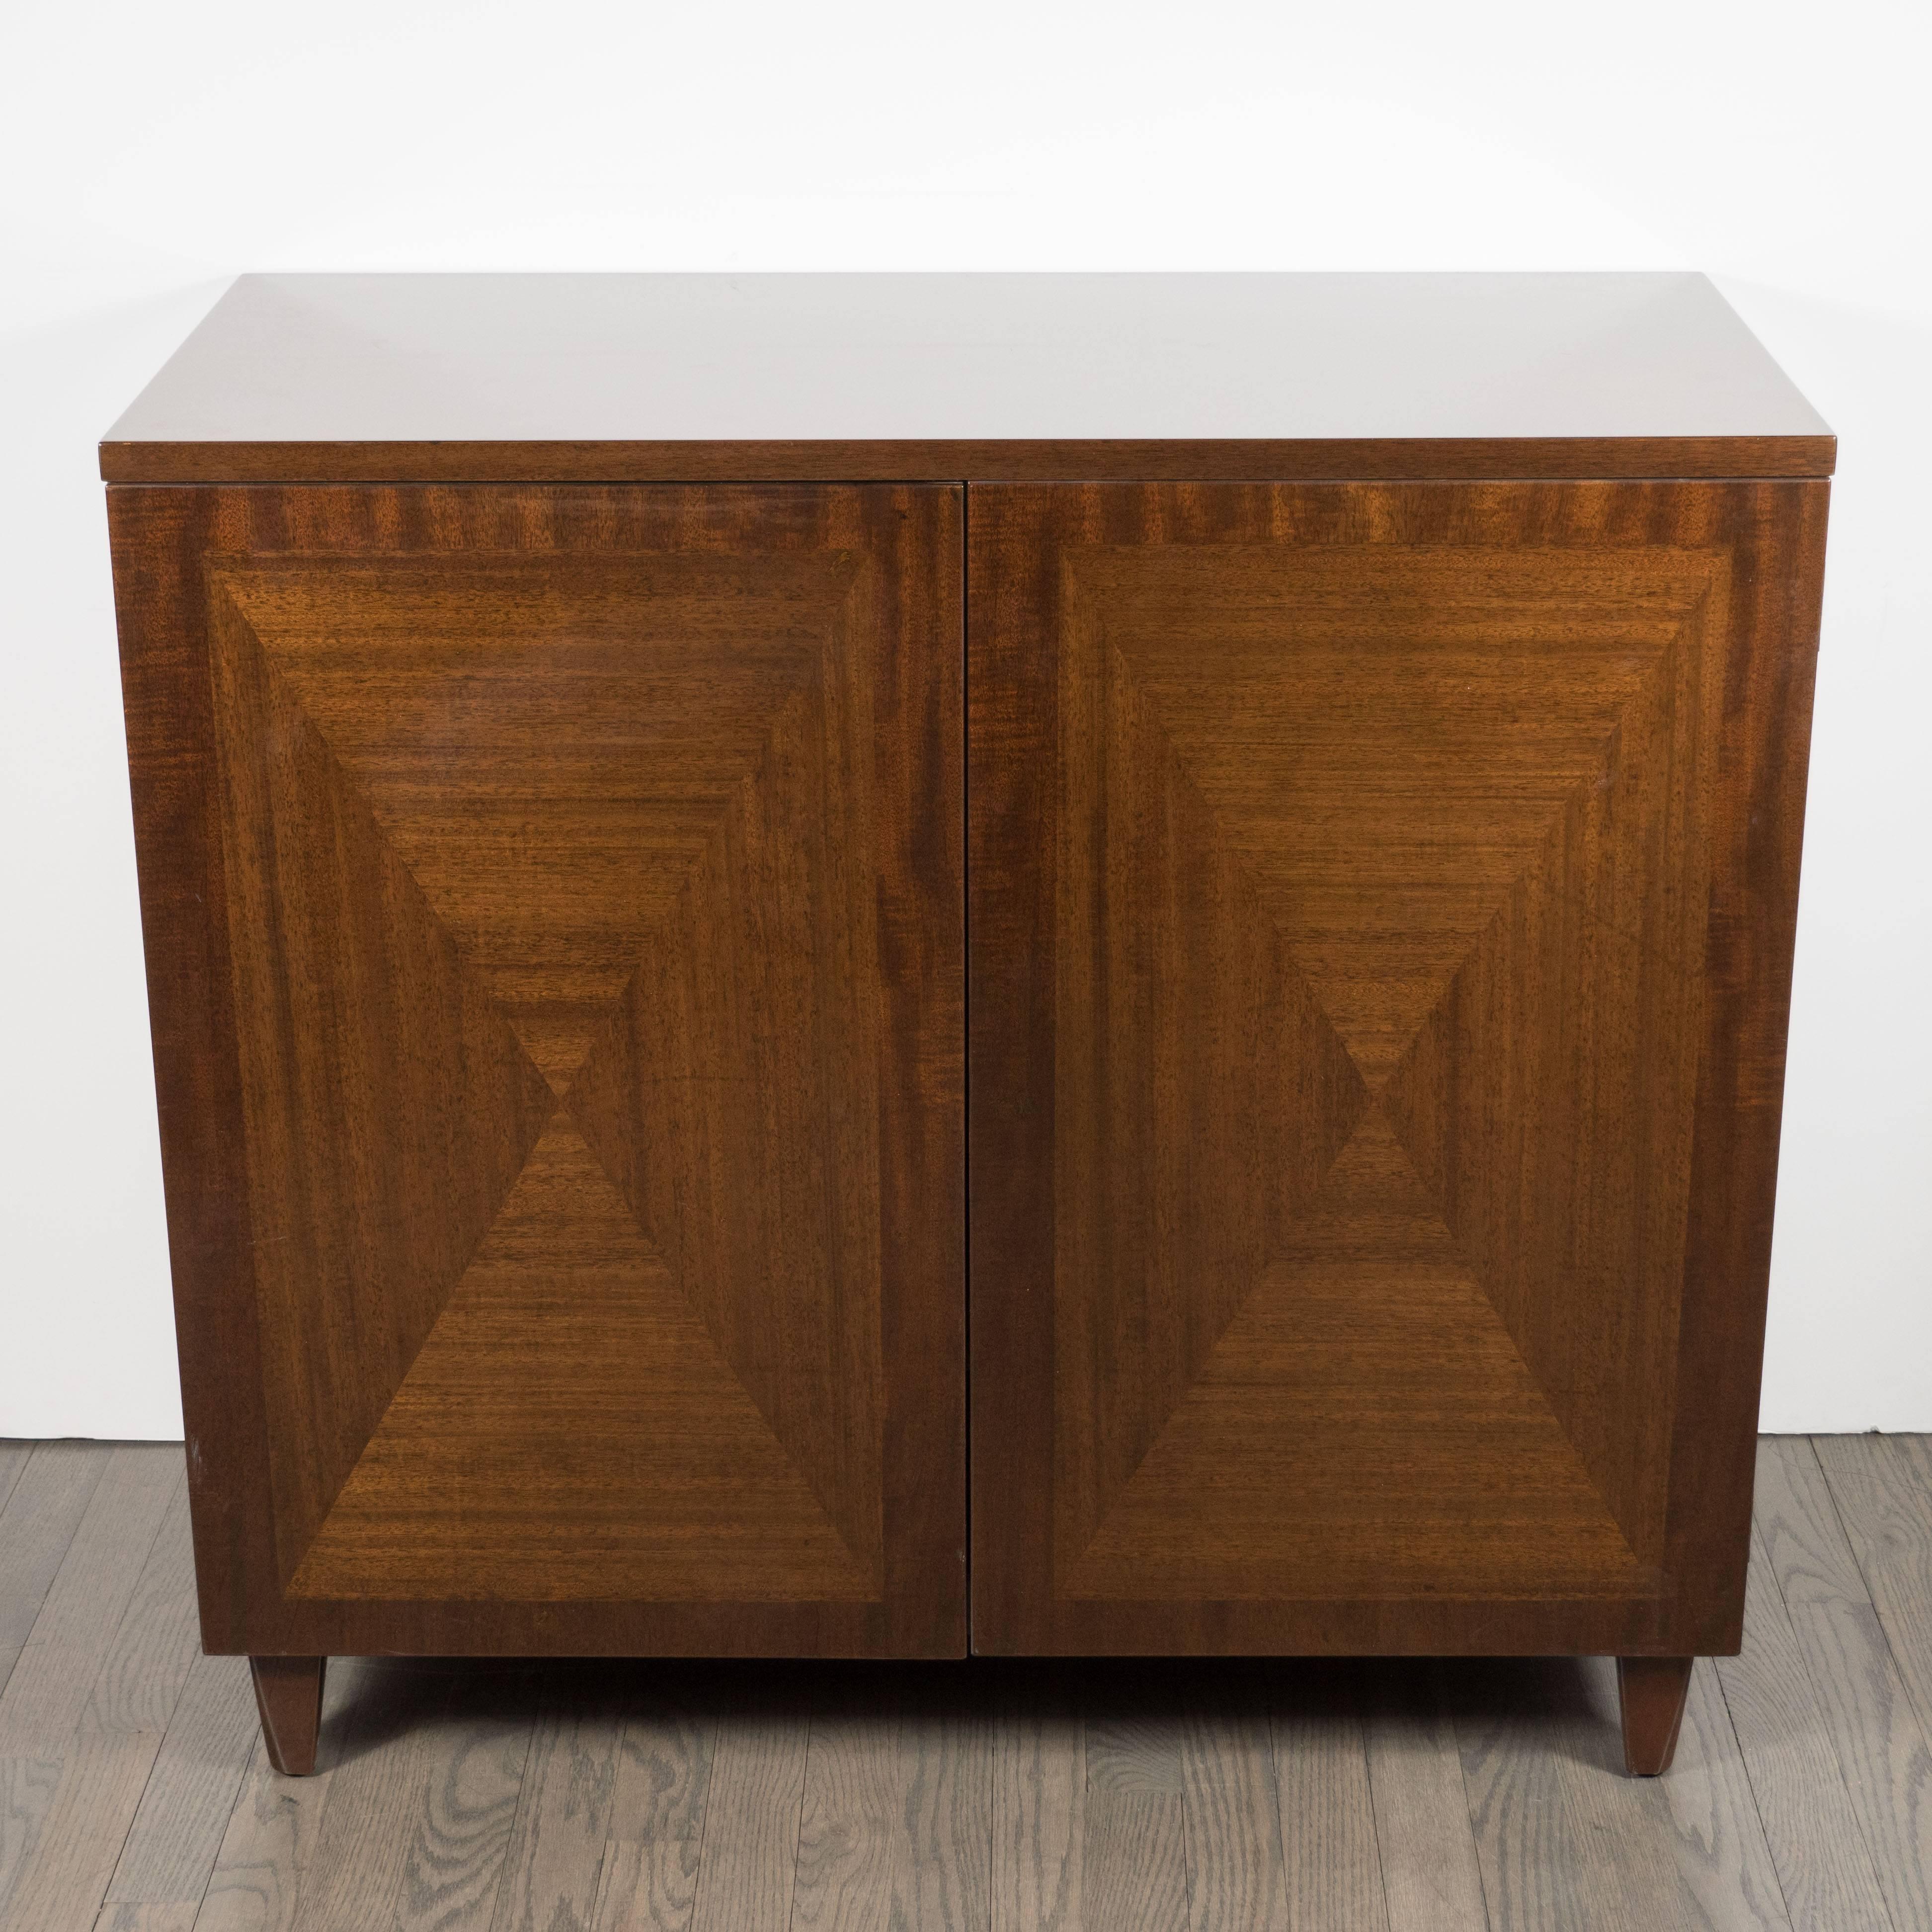 Brass Pair of Parqueted Book-Matched Walnut Cabinets by John Stuart Inc, circa 1960s